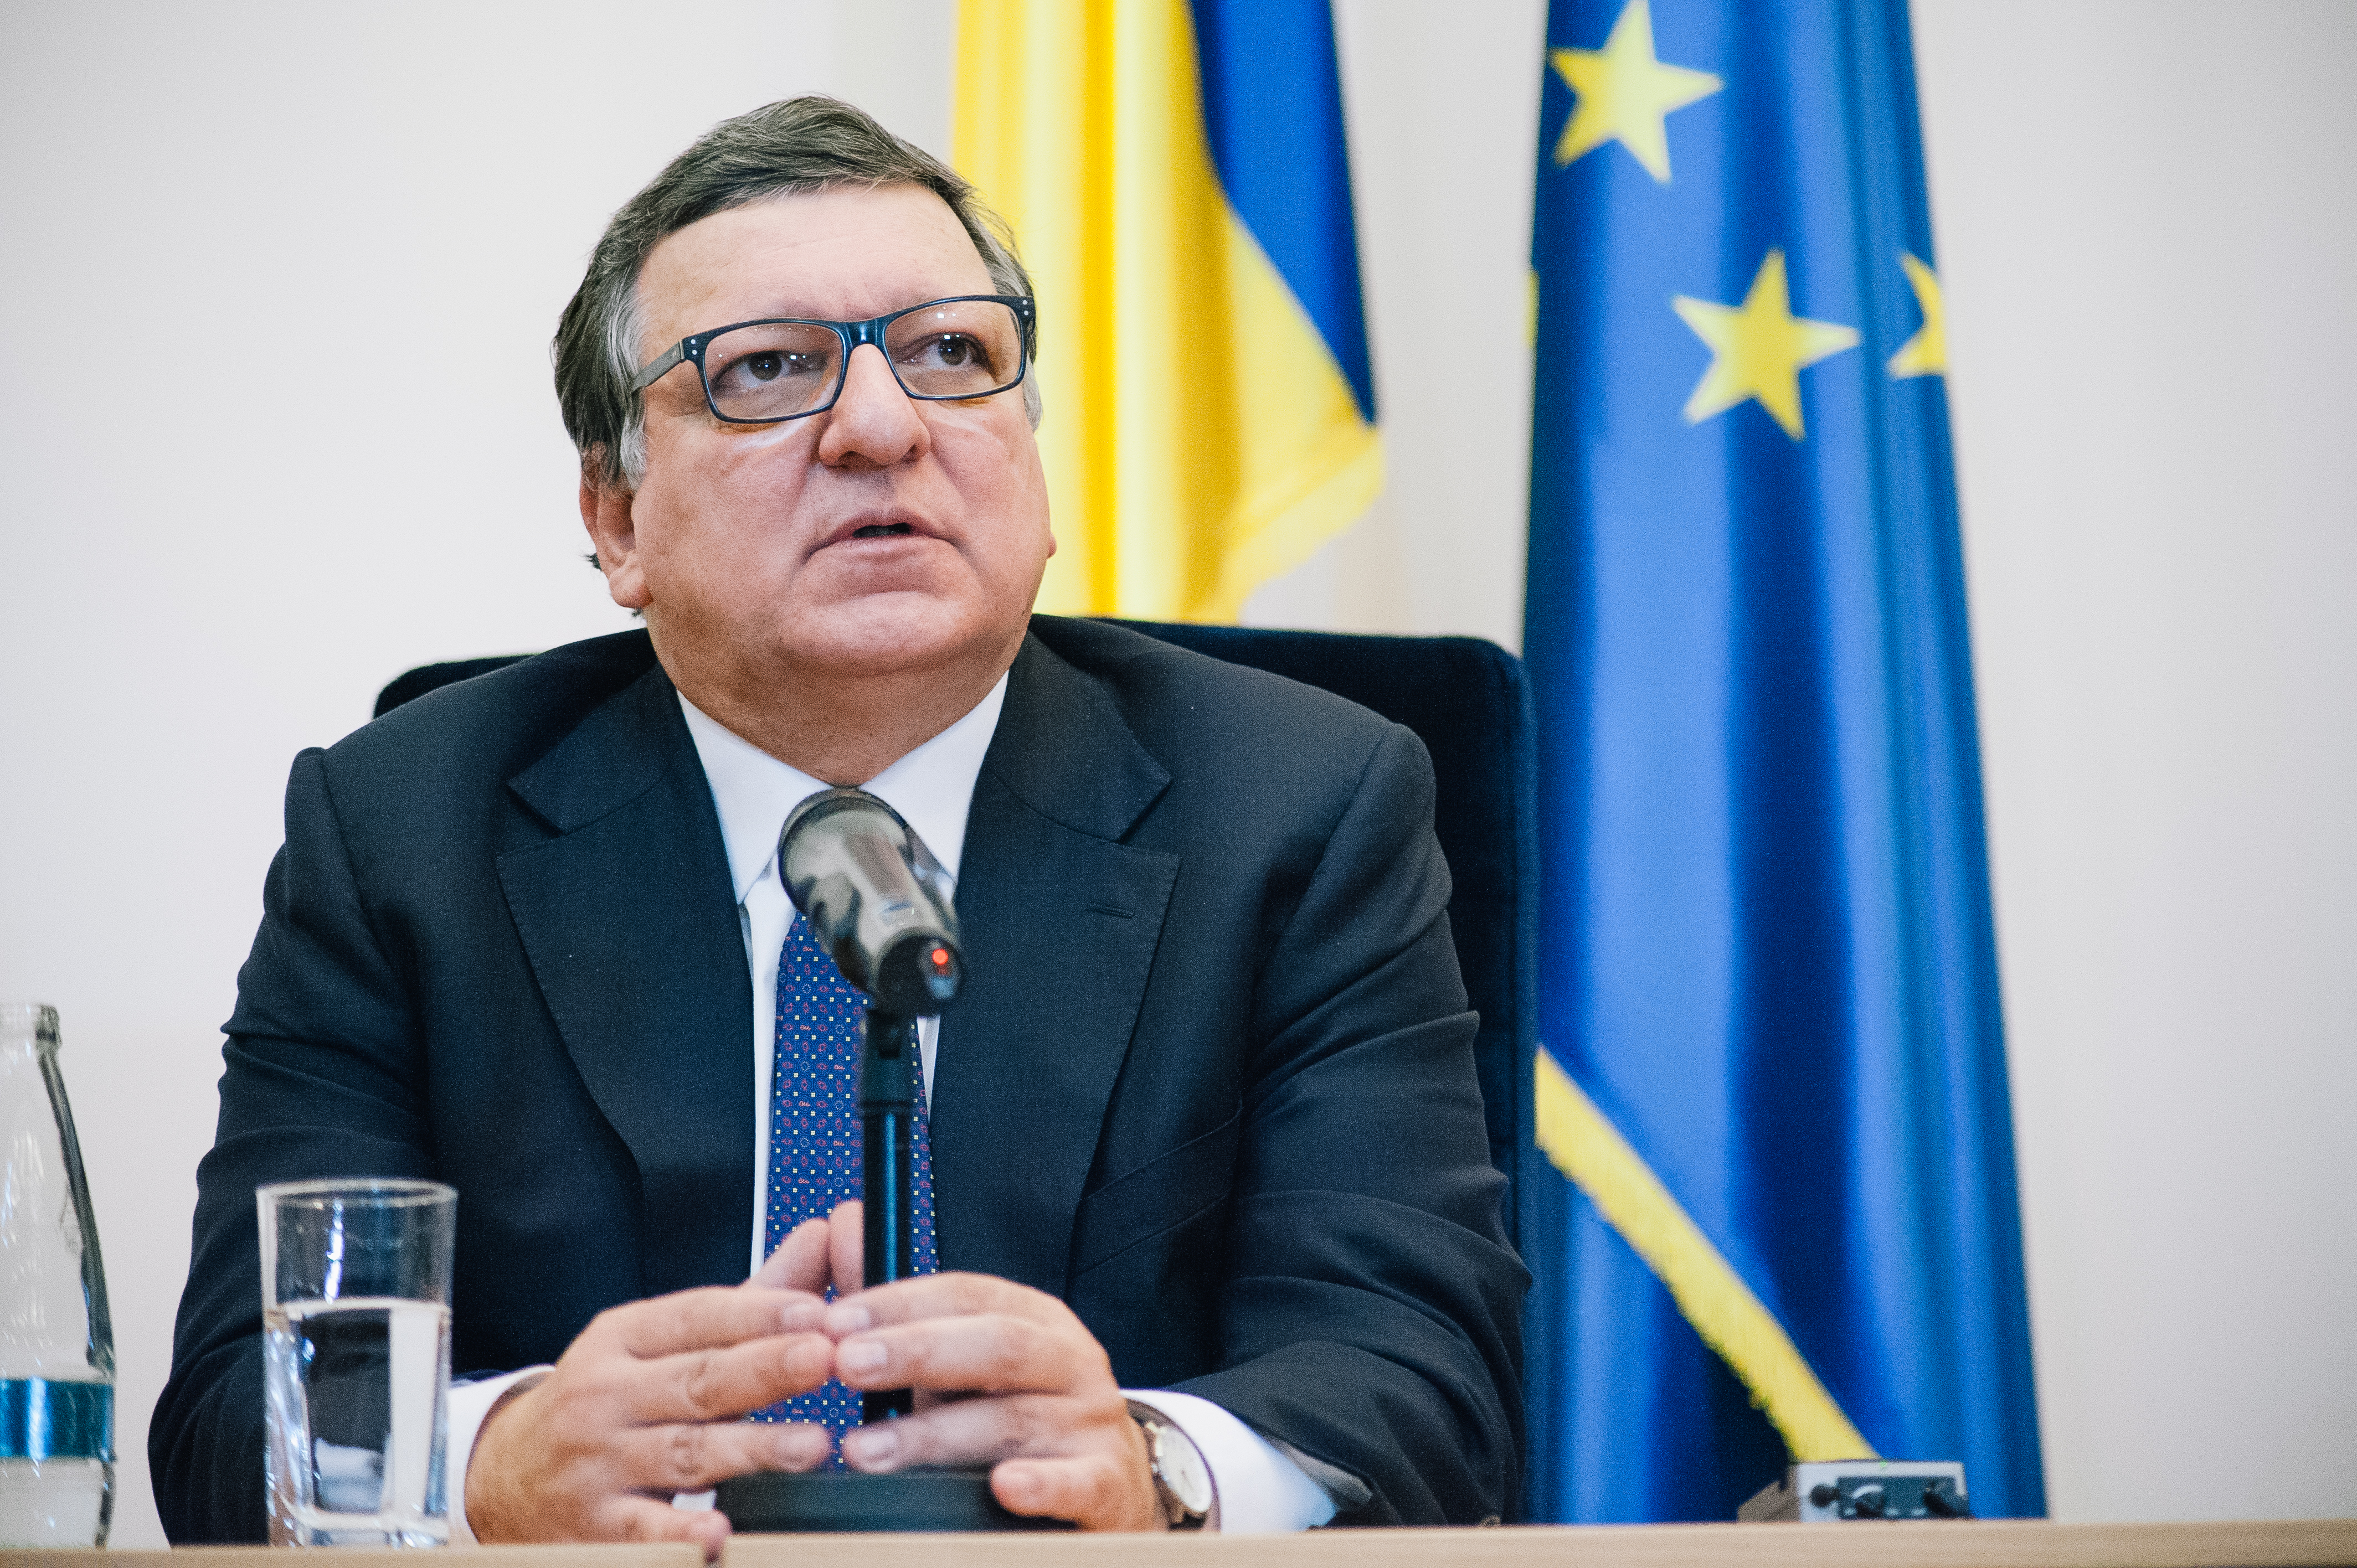 Jose Manuel Durao Barroso, former President of the European Commission, speaks at a press conference, after he received the title of Doctor Honoris Causa from The West University of Timisoara  on January 29, 2016 in Timisoara, Romania. (Ciprian Hord—Everyday Projects/Getty Images)